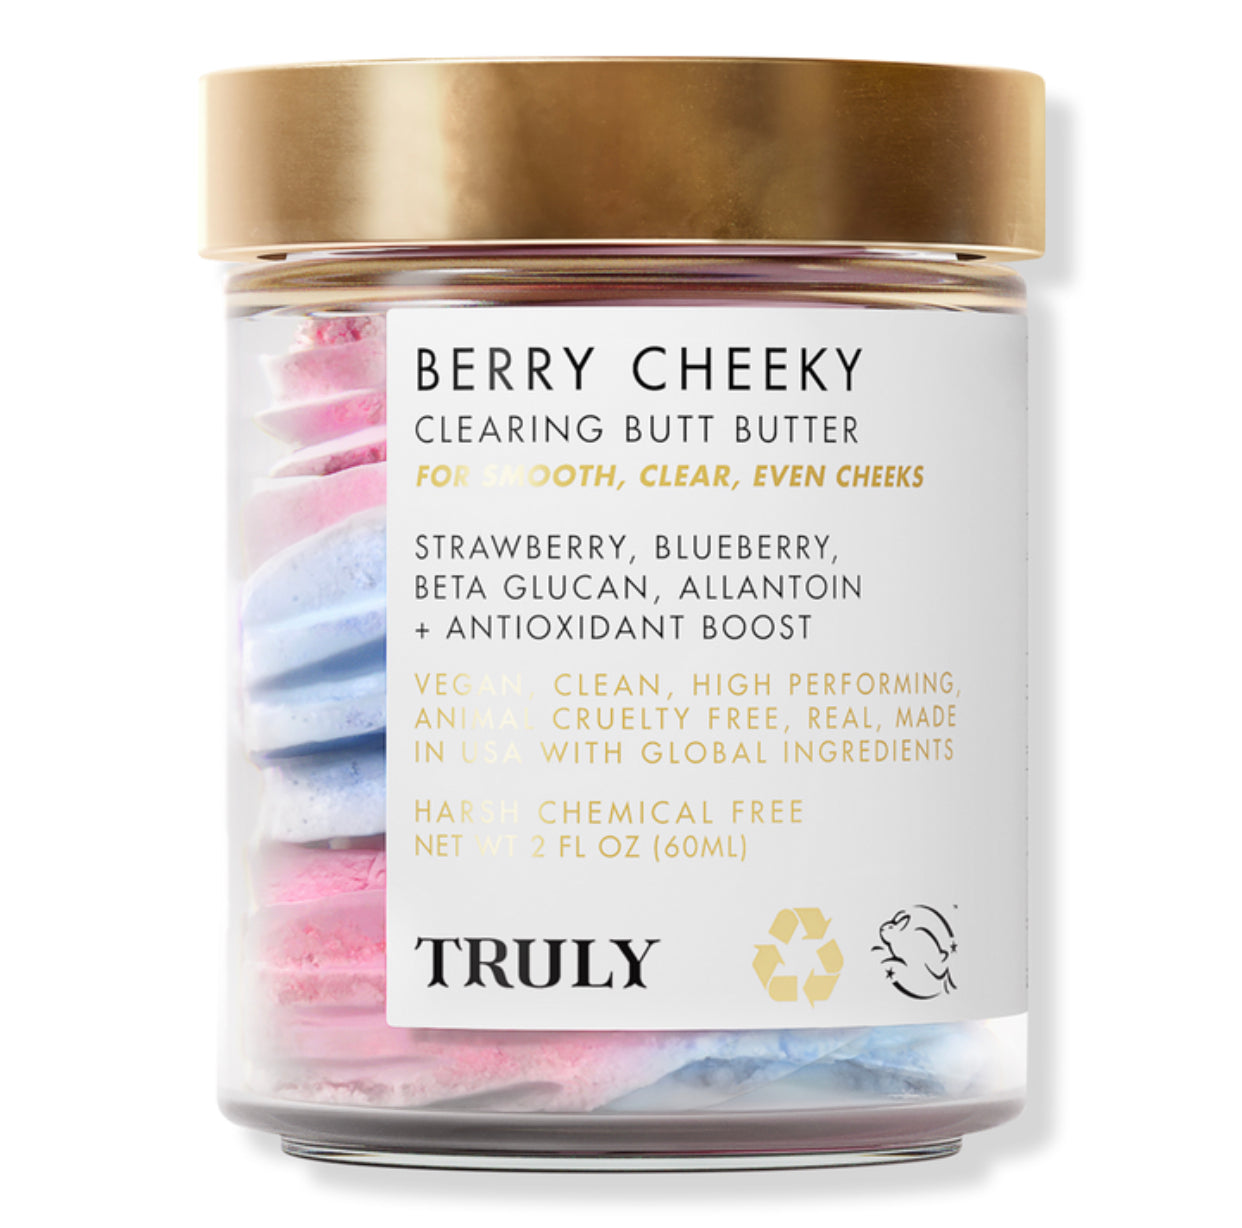 TRULY - Berry Cheeky Clearing Butt Butter | 60 mL